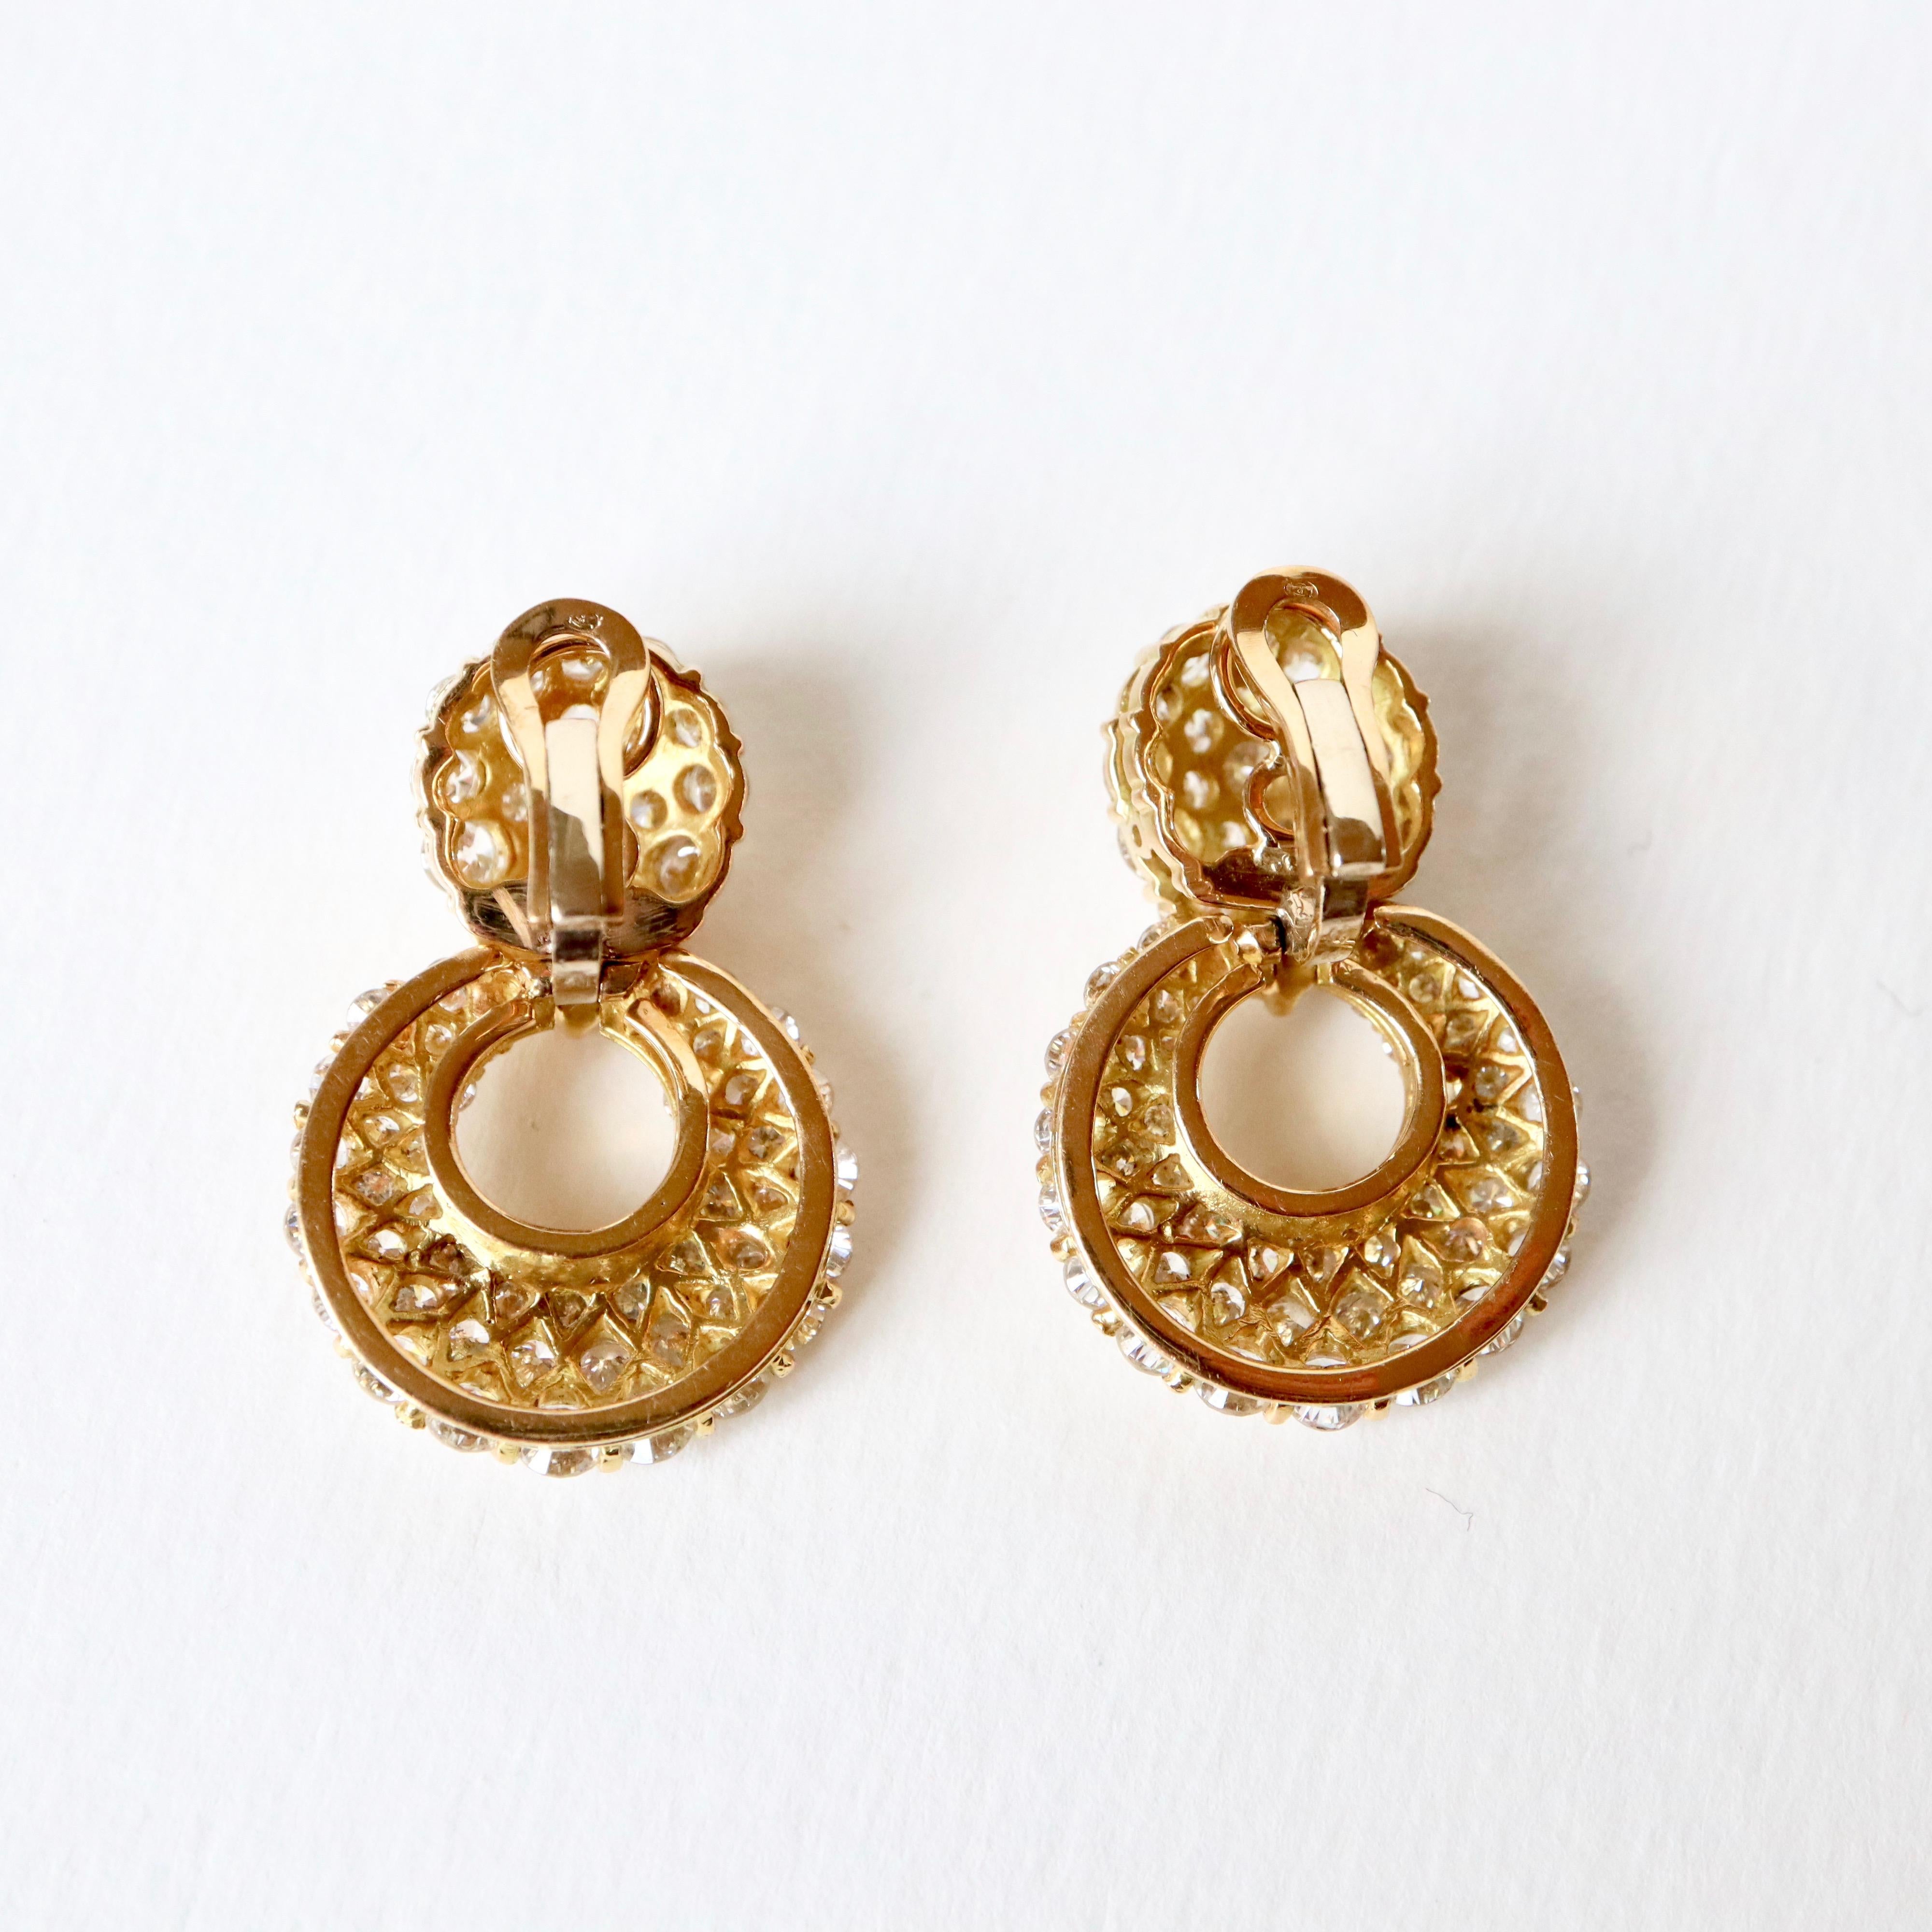 Clip Earrings in 18 Carat yellow Gold and Diamonds setting 3 Carats of Diamonds each totaling 6 Carats for the two Clips. 
Gross Weight: 21.9 g
Height 3.5 cm. Width 2 cm 
Gold Hallmark: Owl